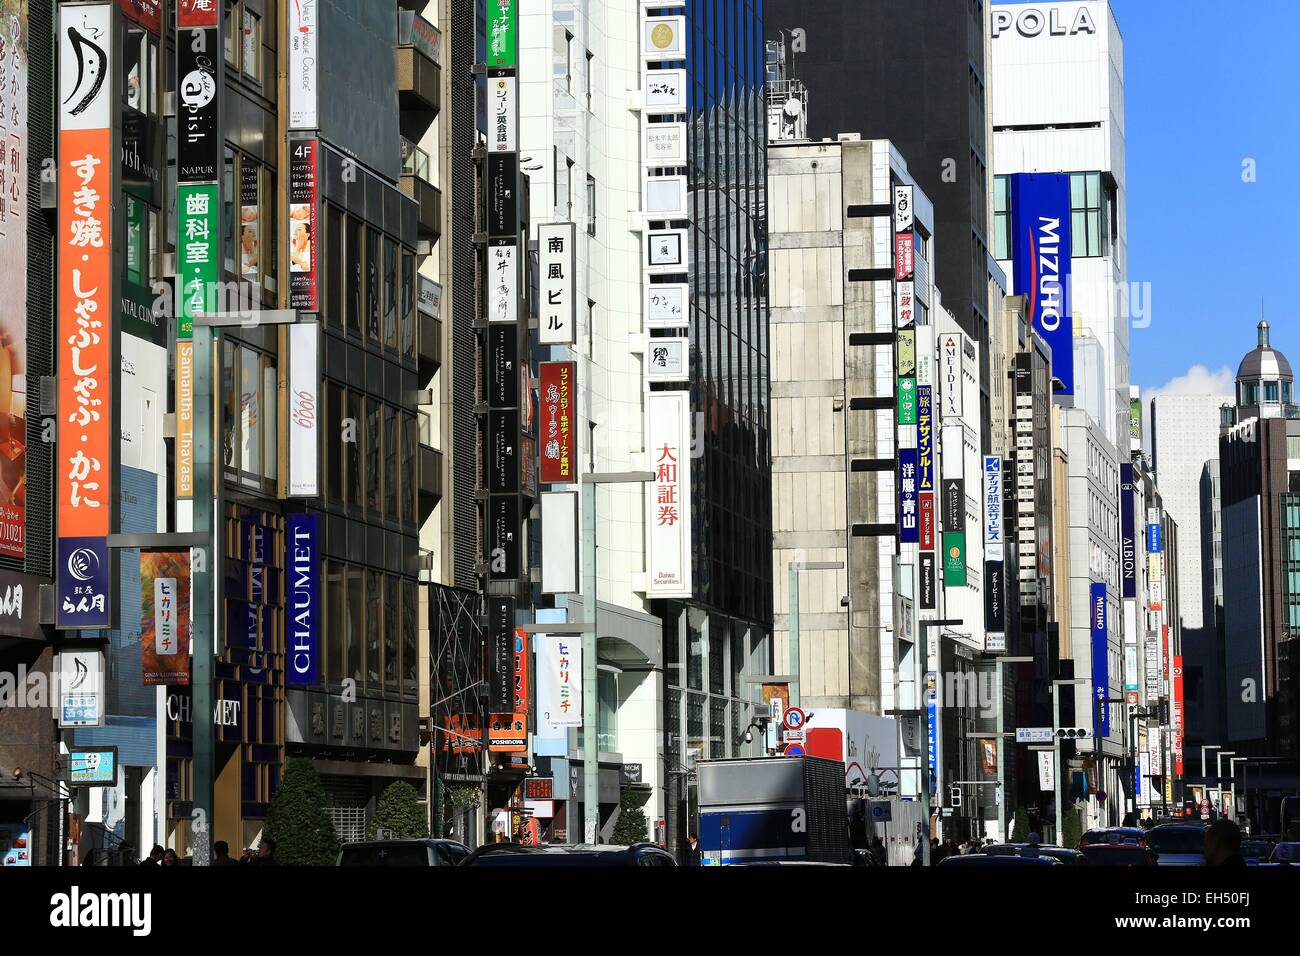 Louis vuitton ginza tokyo hi-res stock photography and images - Alamy